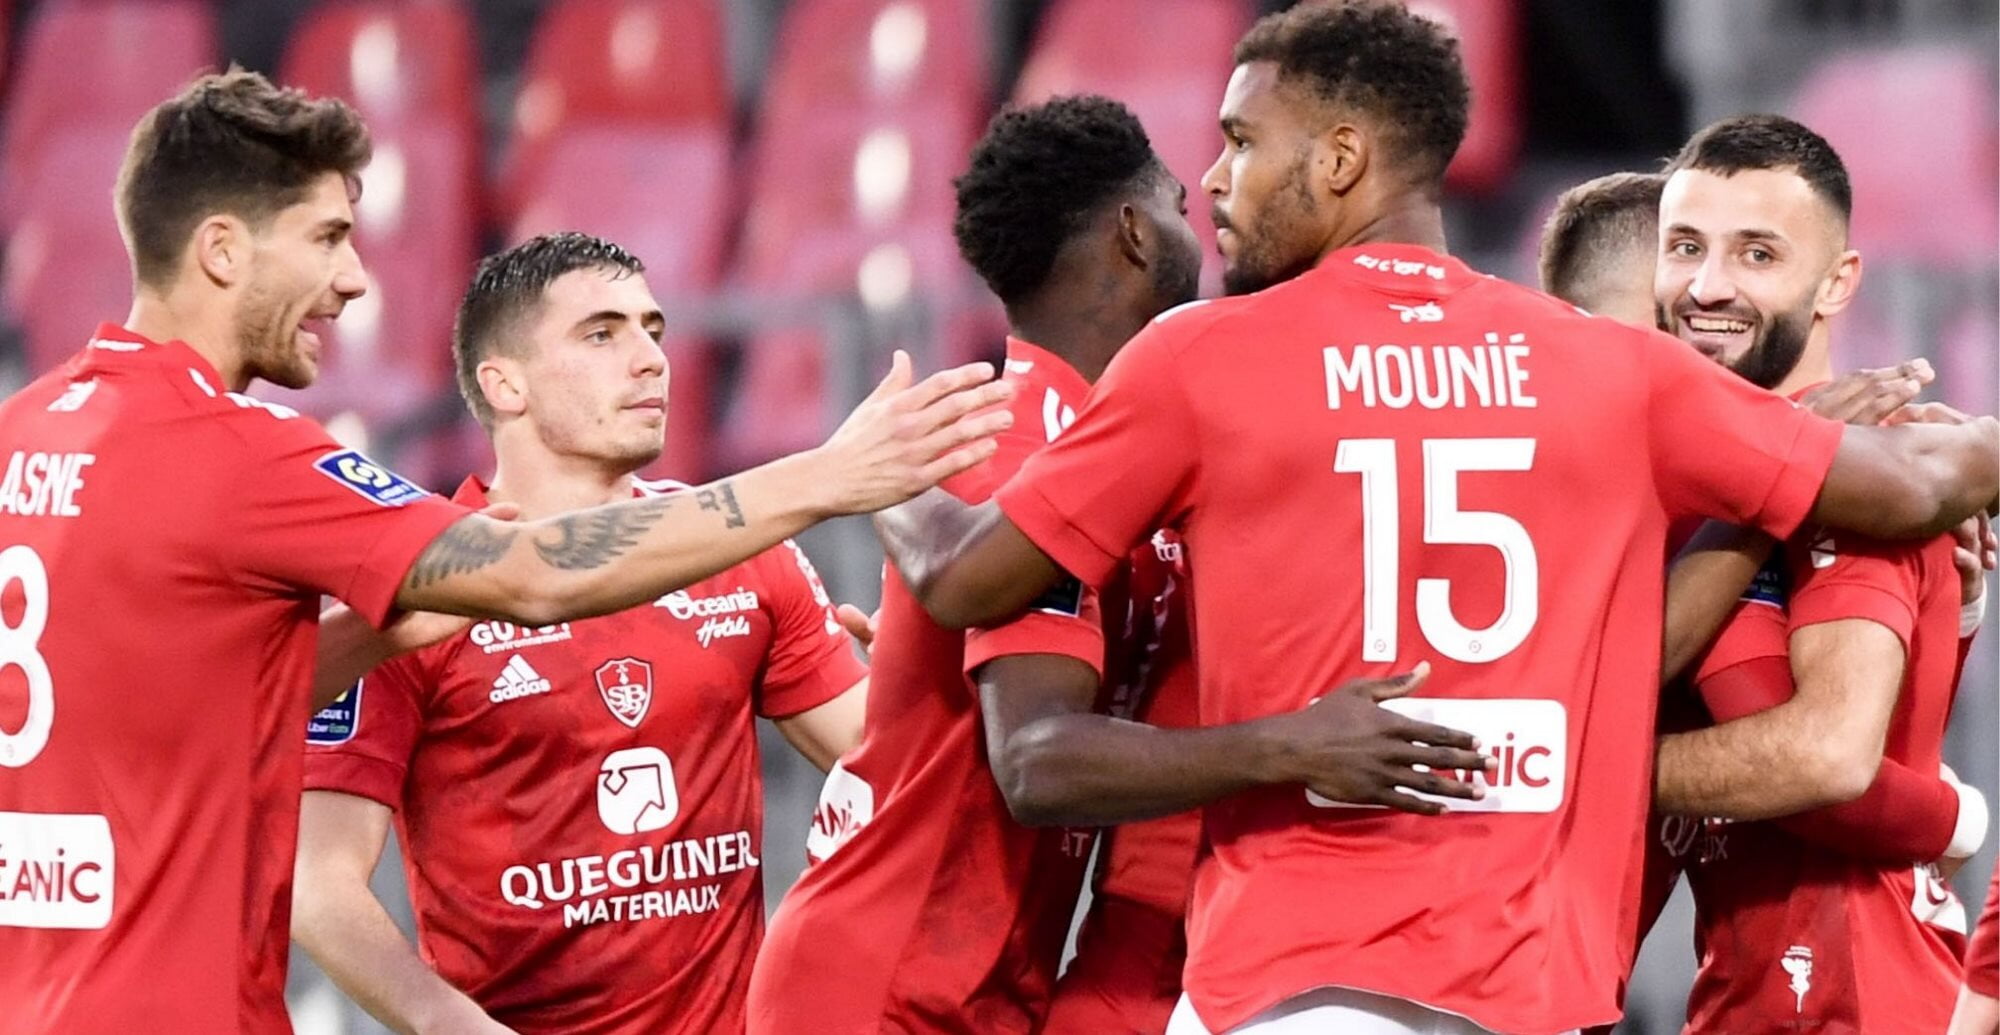 All you need to know: Stade Brestois 29